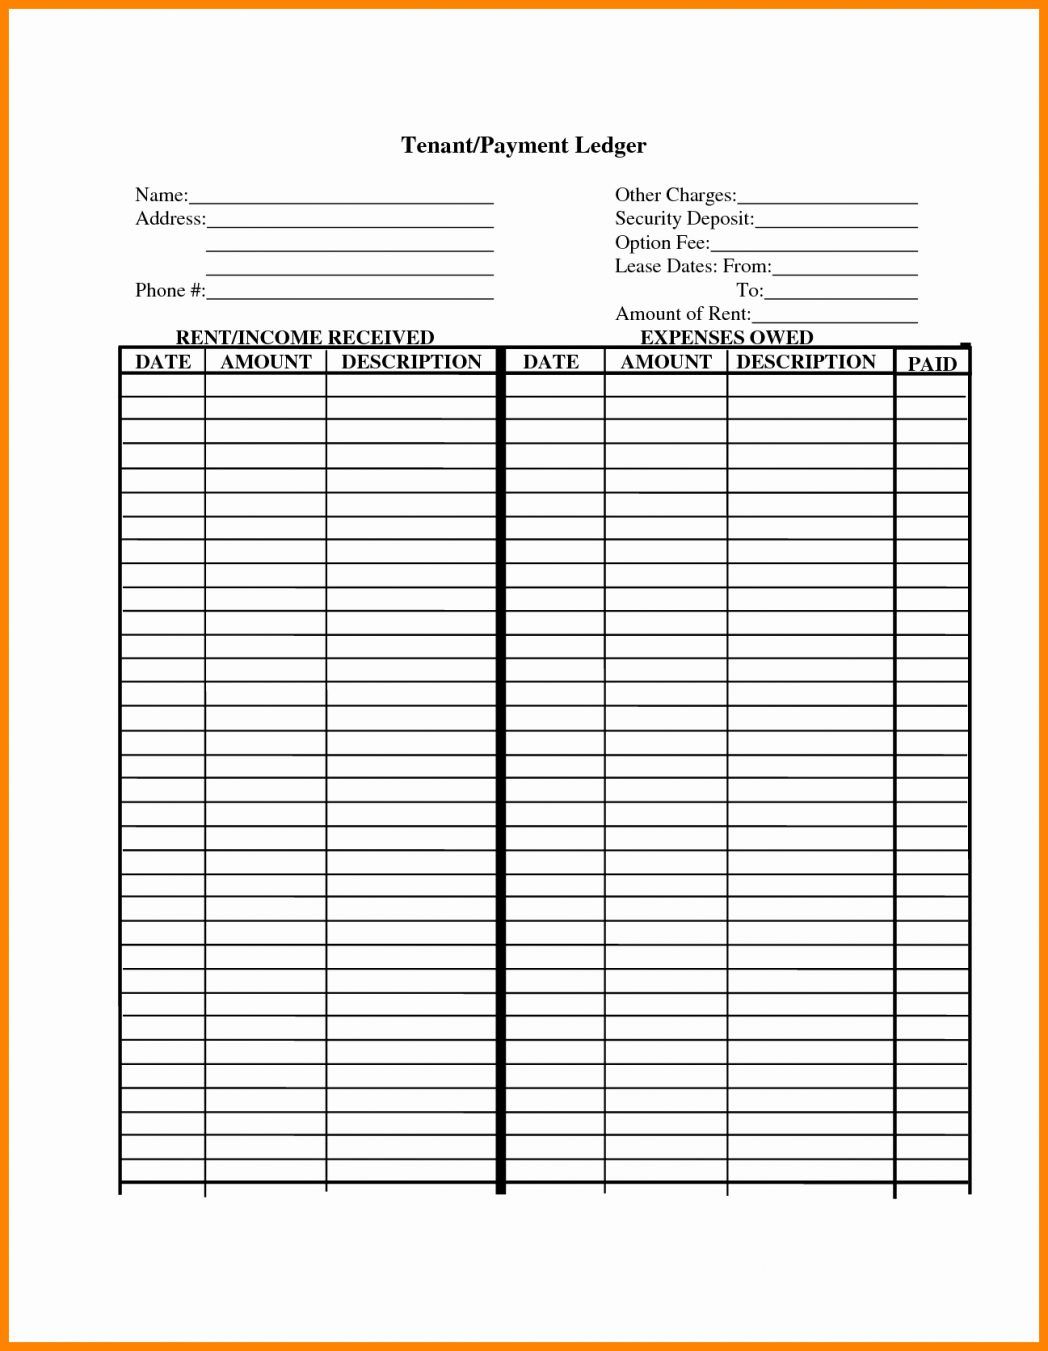 general-ledger-template-excel-xls-free-excel-spreadsheets-uncertainty